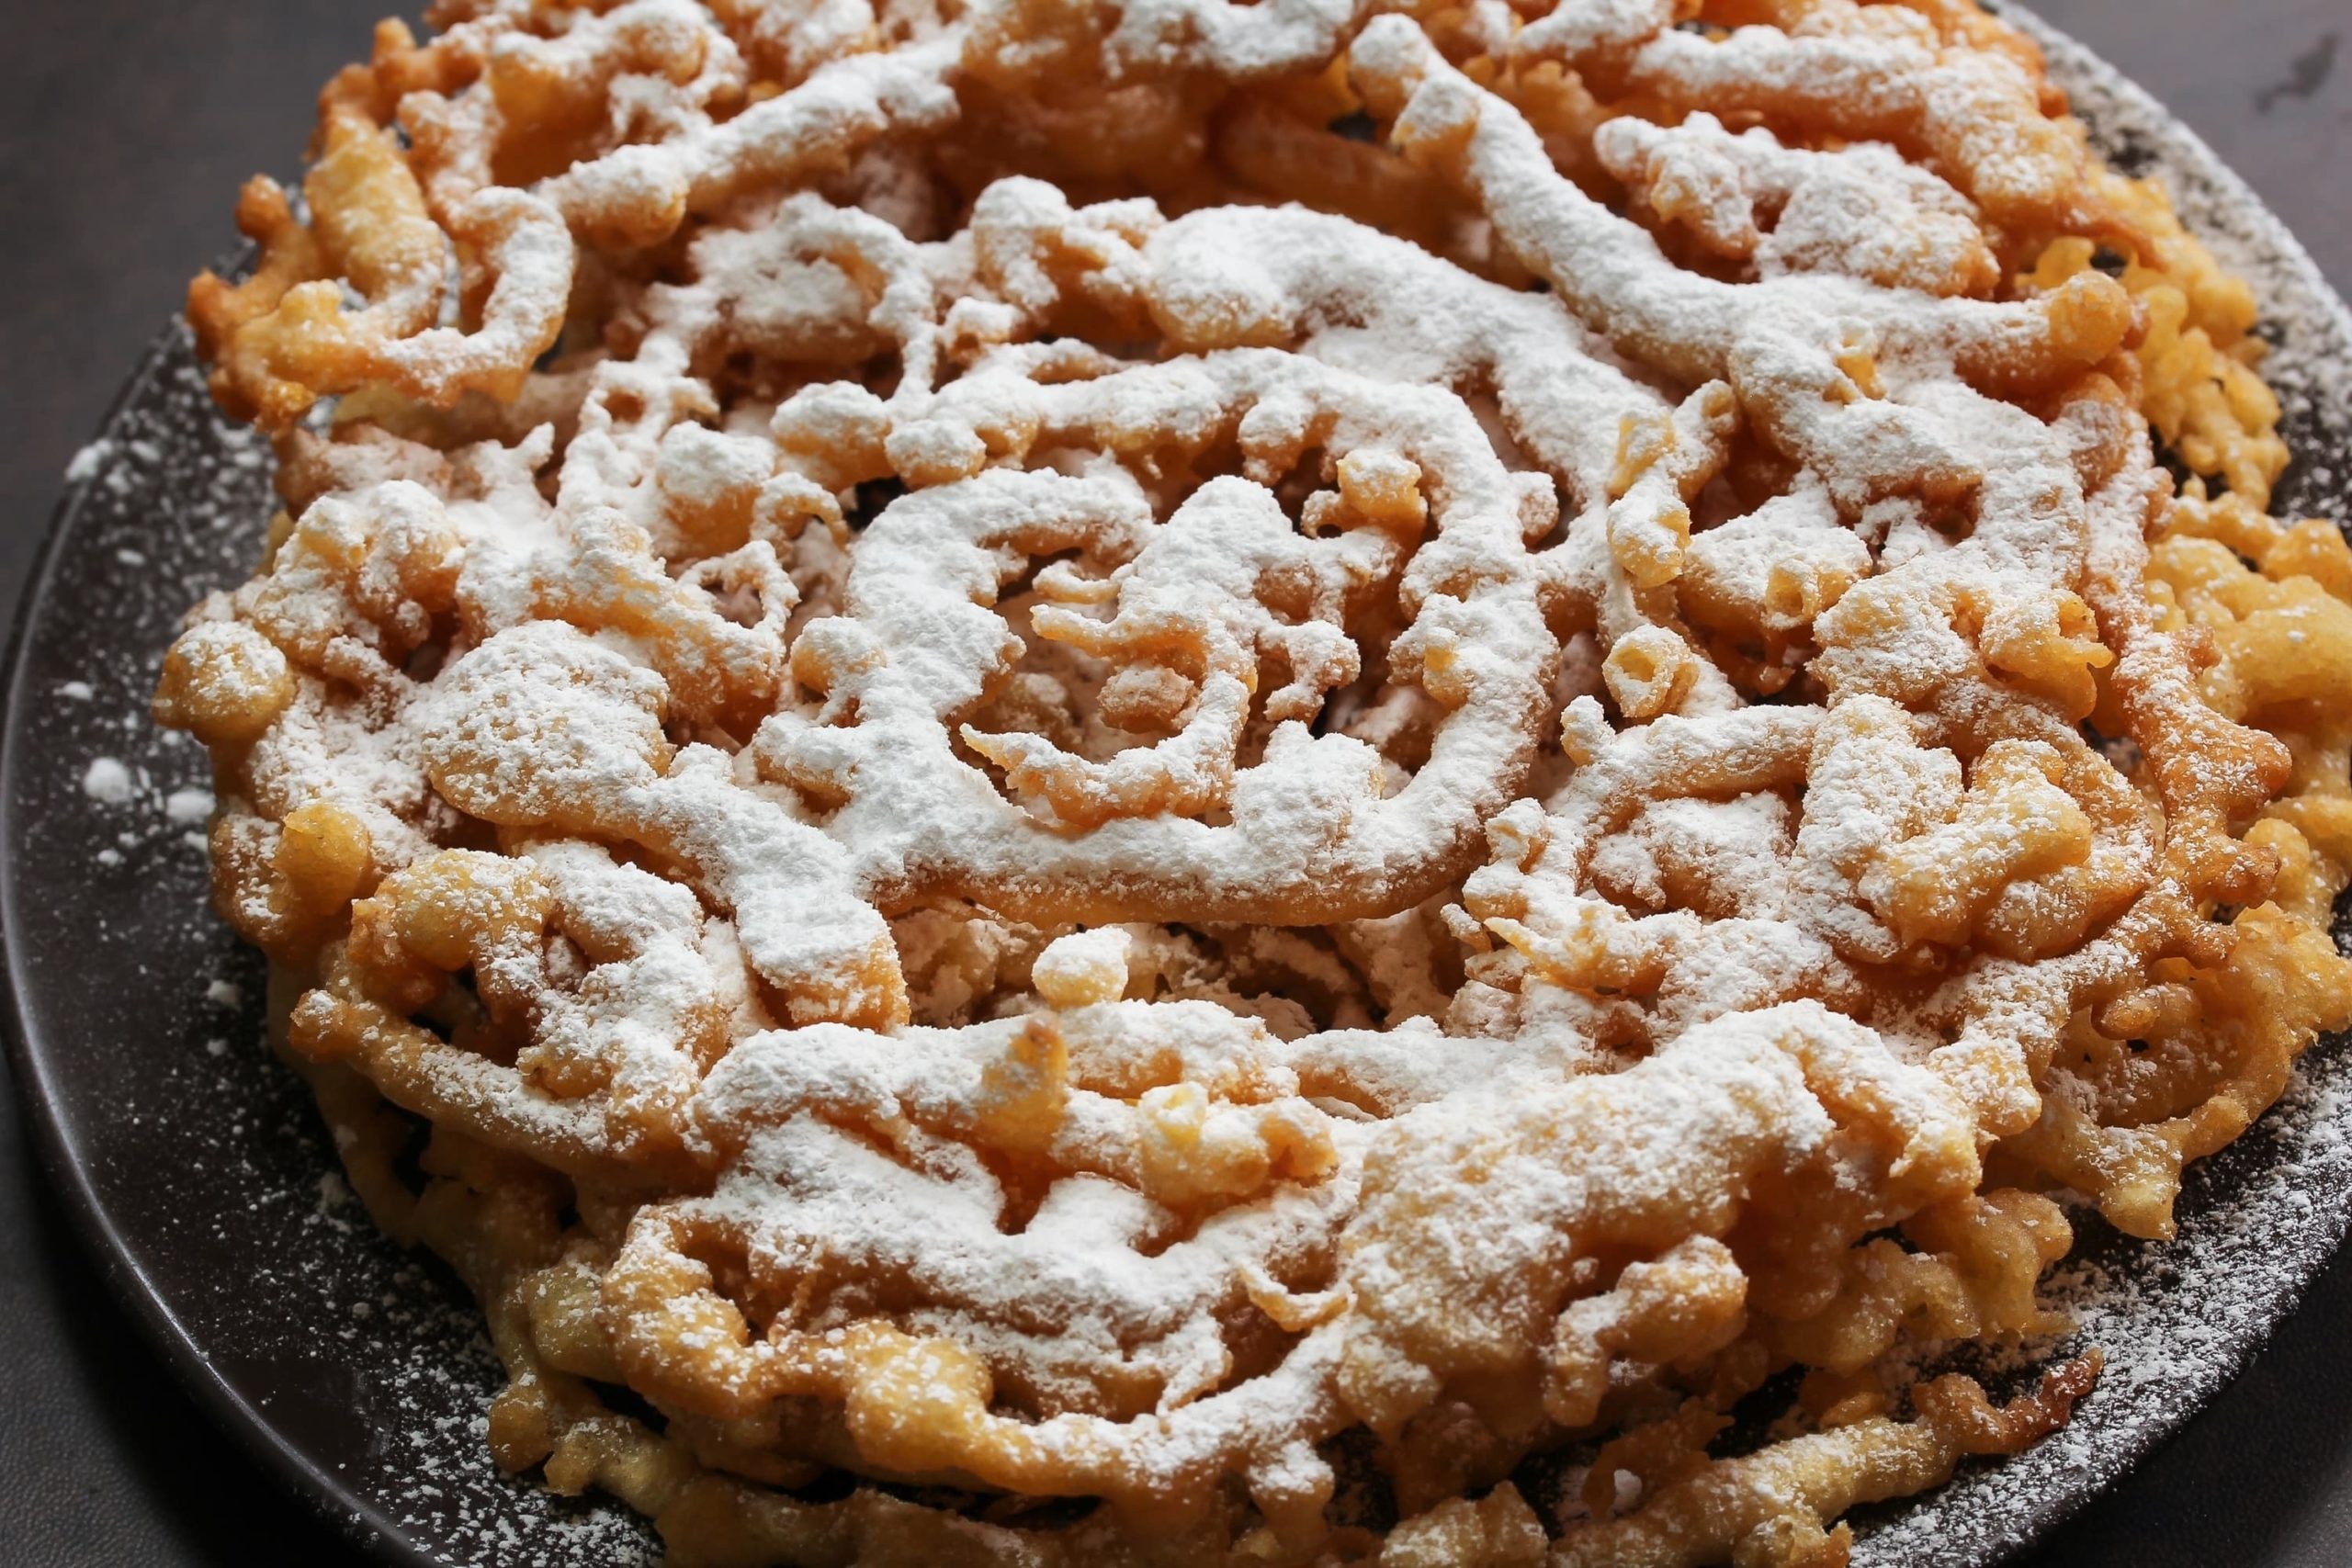 Traditional Amish funnel cake with powdered sugar.